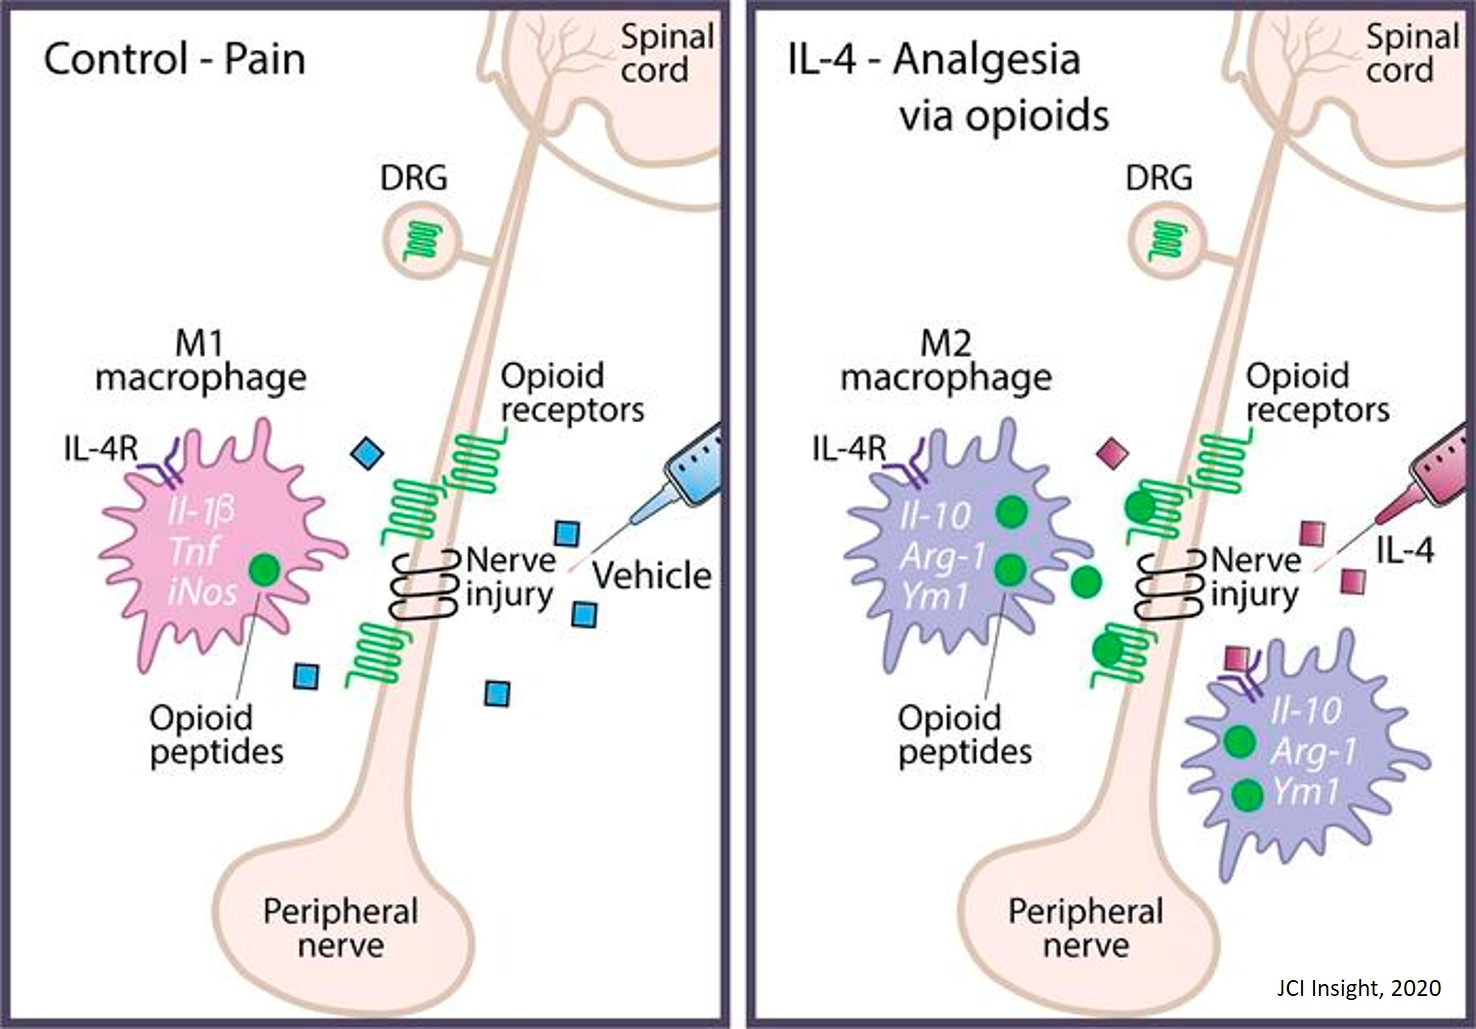 An alternative strategy for the management of inflammatory pain